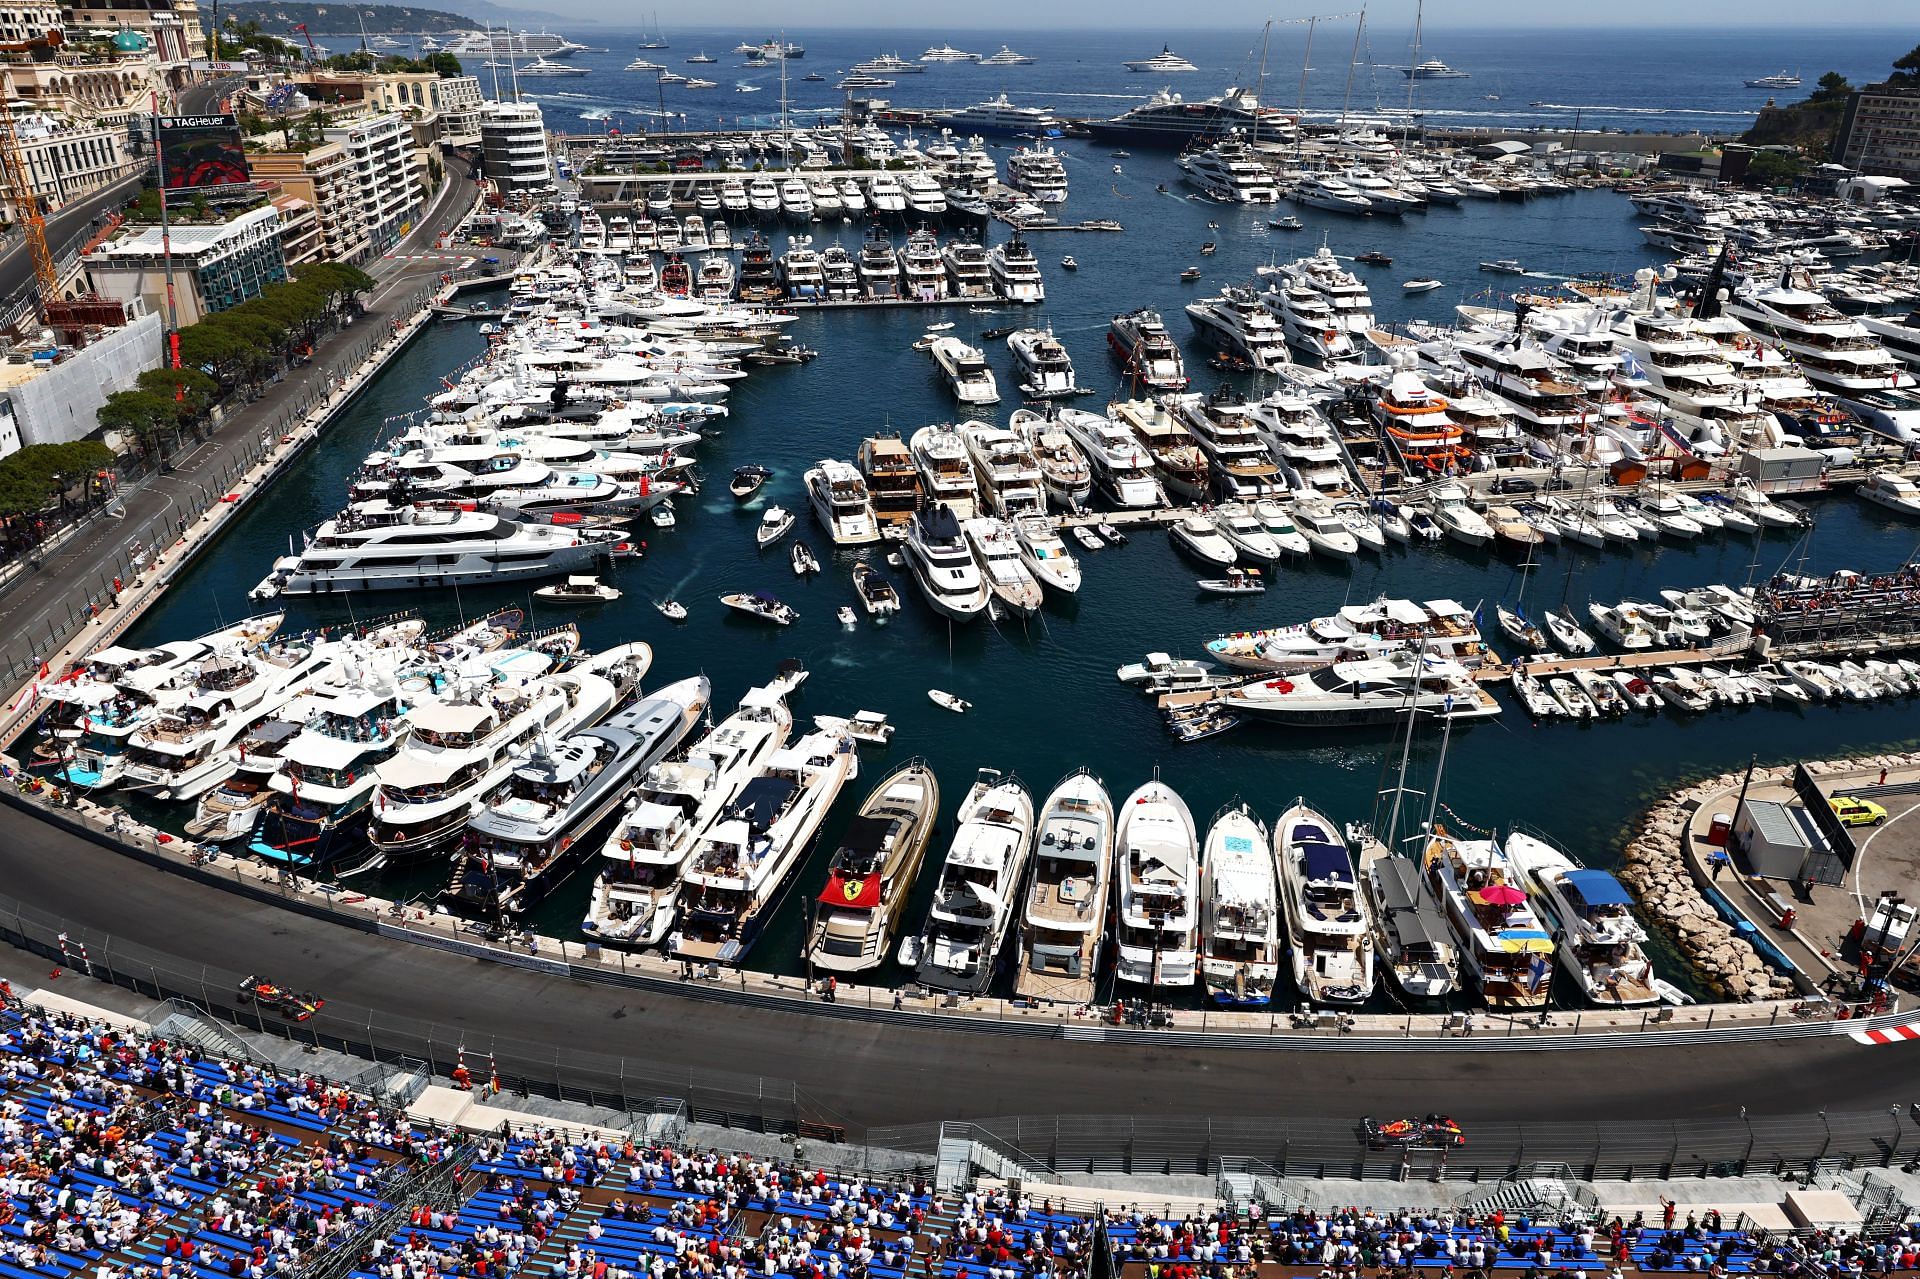 Stakes will be high for the 2022 F1 Monaco GP!